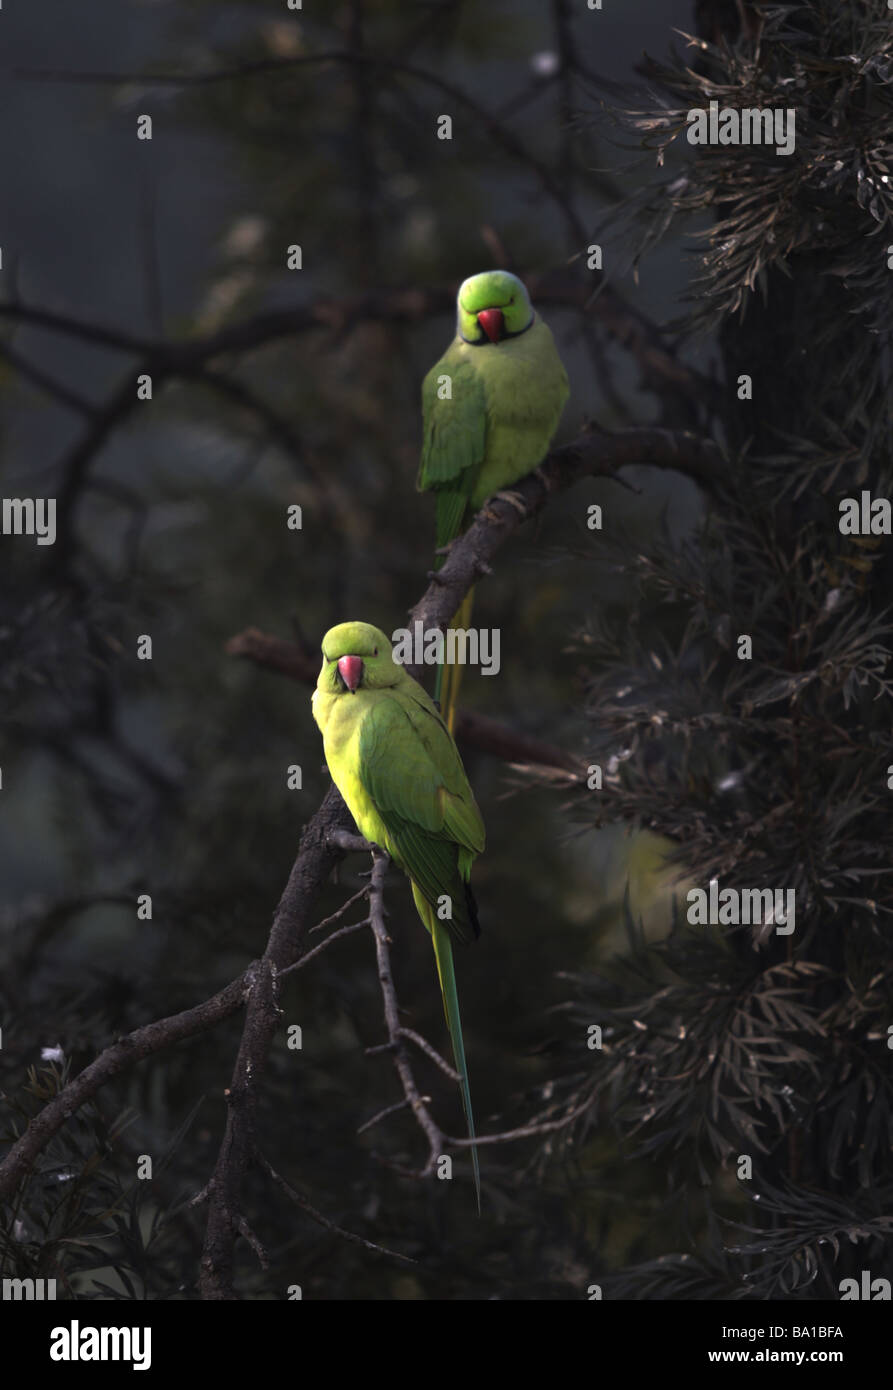 A pair of green Parrots sit in a tree in Delhi's beautiful Lodi Gardens that is a haven for wildlife in central Delhi India Stock Photo